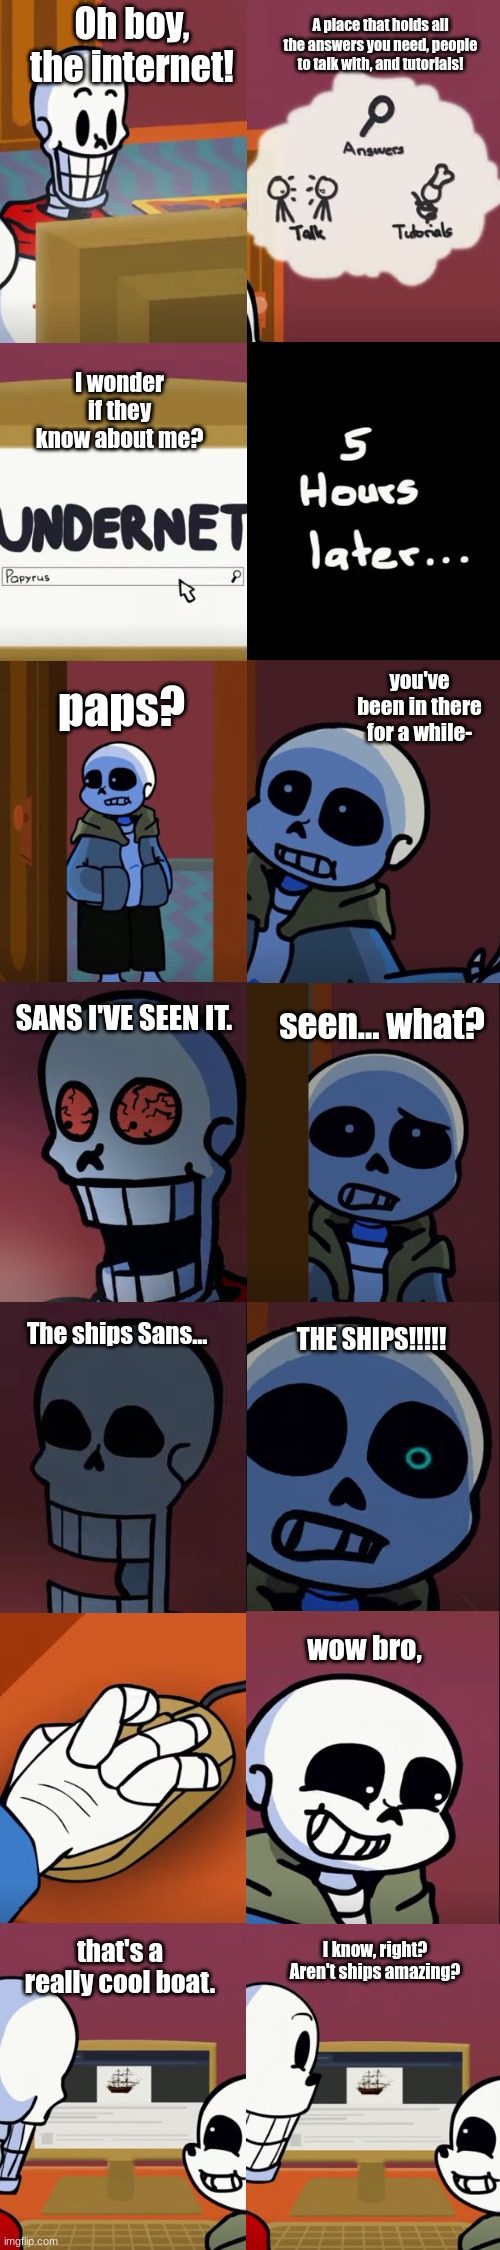 spent way too much time on this lol | A place that holds all the answers you need, people to talk with, and tutorials! Oh boy, the internet! I wonder if they know about me? you've been in there for a while-; paps? seen... what? SANS I'VE SEEN IT. THE SHIPS!!!!! The ships Sans... wow bro, that's a really cool boat. I know, right? Aren't ships amazing? | image tagged in undertale papyrus,ships,comics | made w/ Imgflip meme maker